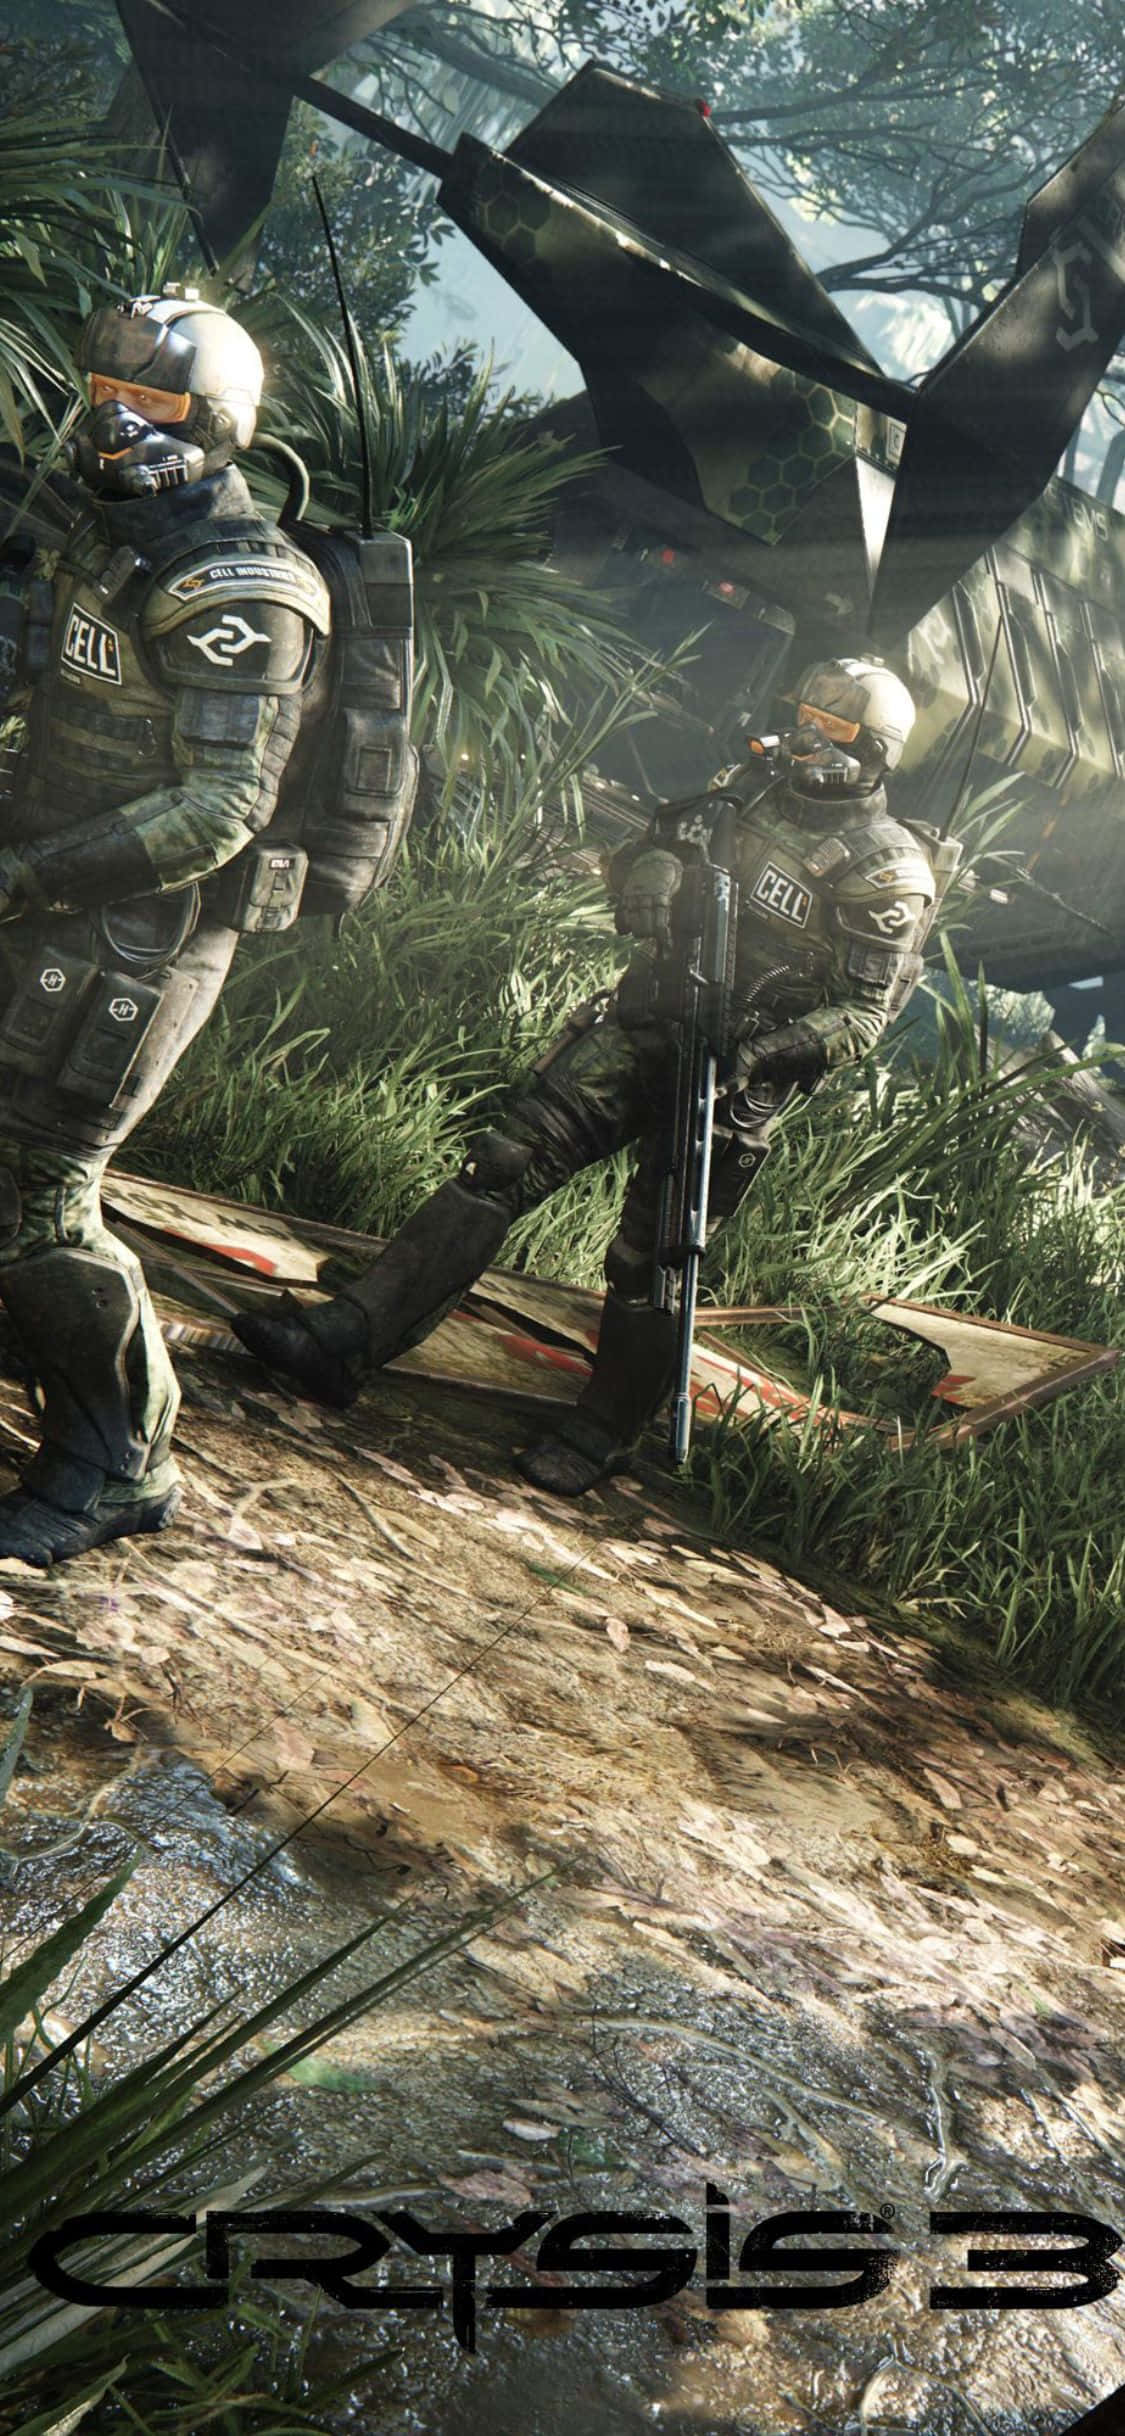 Thrilling Sci-Fi Fantasy Adventure – Crysis 3 for Iphone X